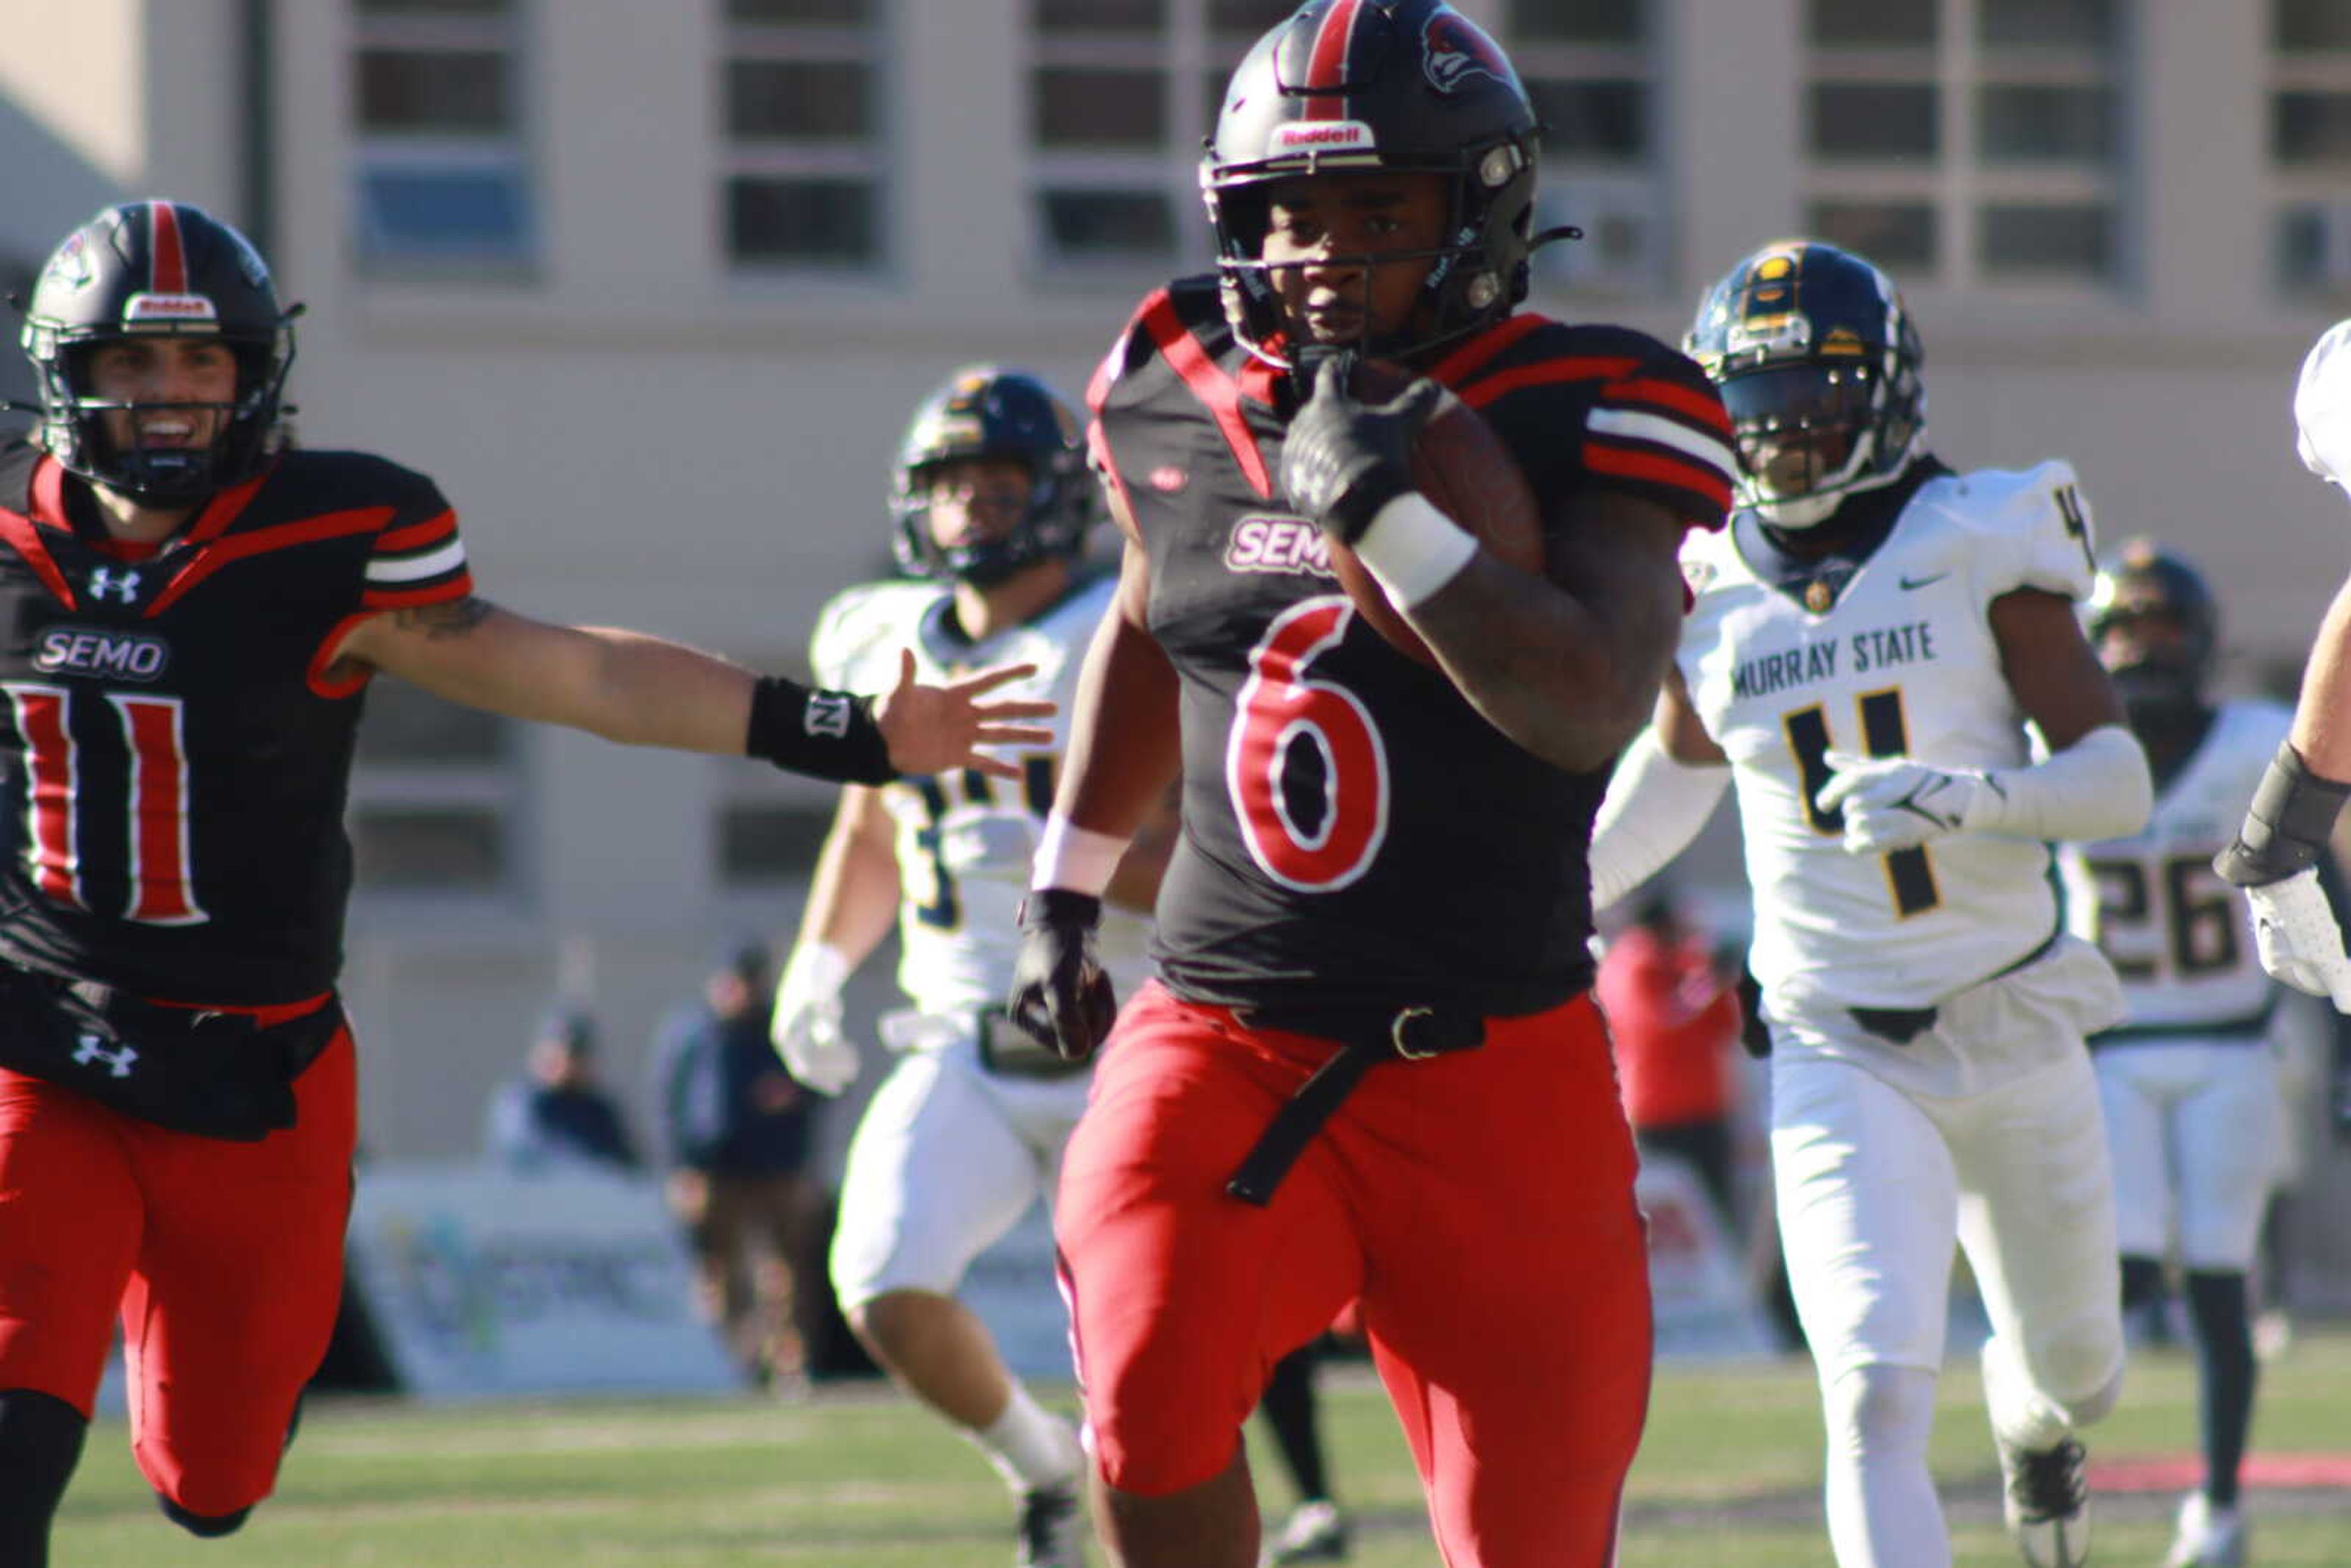 Record breaking senior Geno Hess scores the third touchdown of the OVC Champion game on Saturday, Nov. 19. Hess ran 317 yards and scored four touchdowns to help secure the win for the Redhawks.